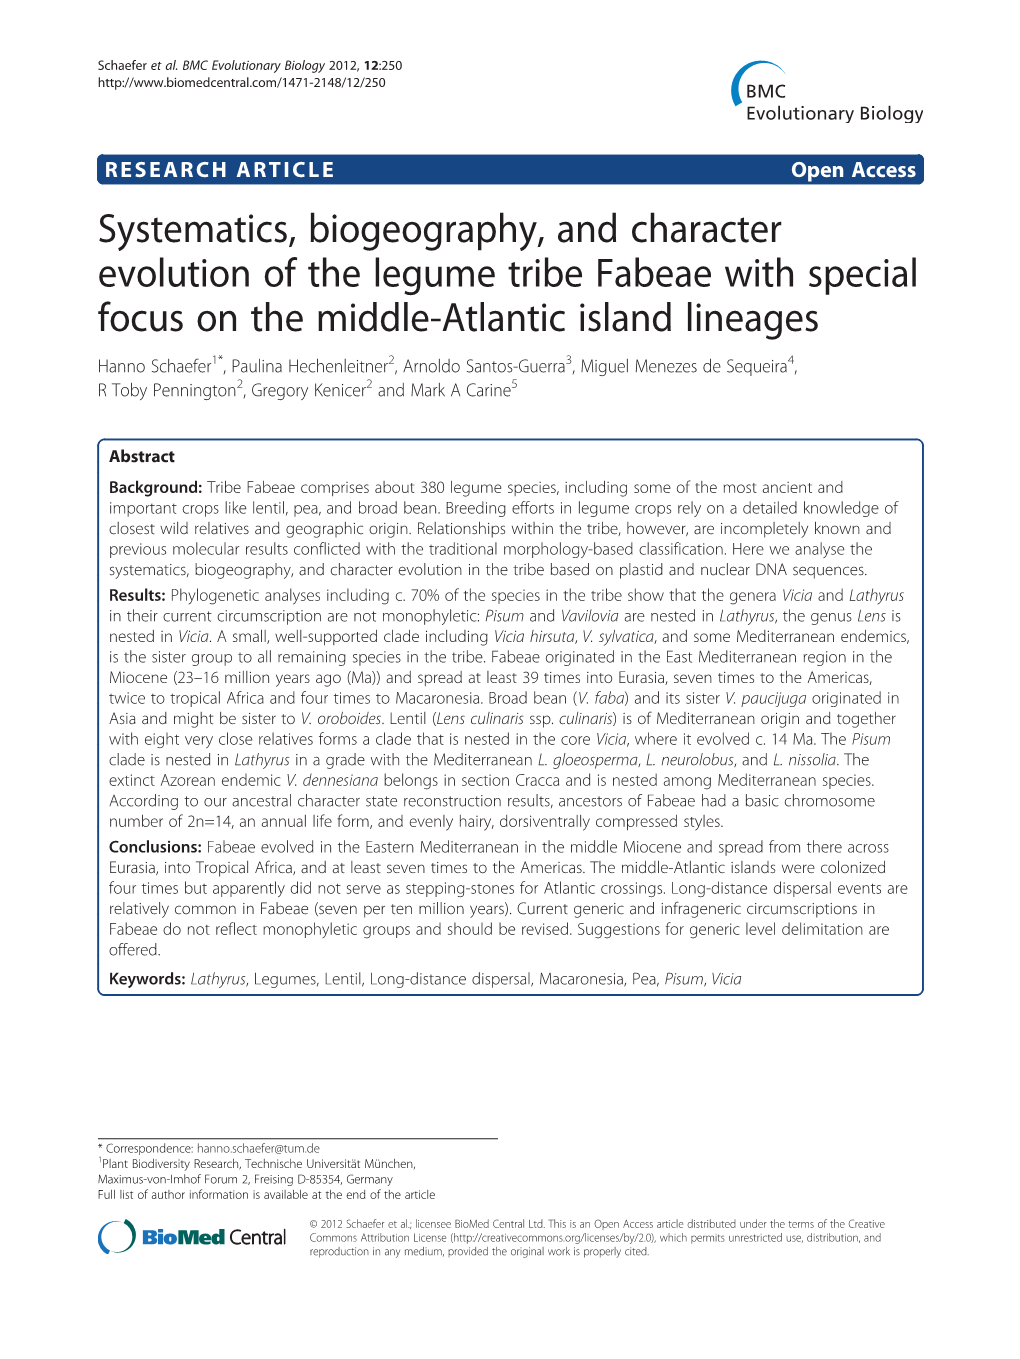 Systematics, Biogeography, and Character Evolution of the Legume Tribe Fabeae with Special Focus on the Middle-Atlantic Island L